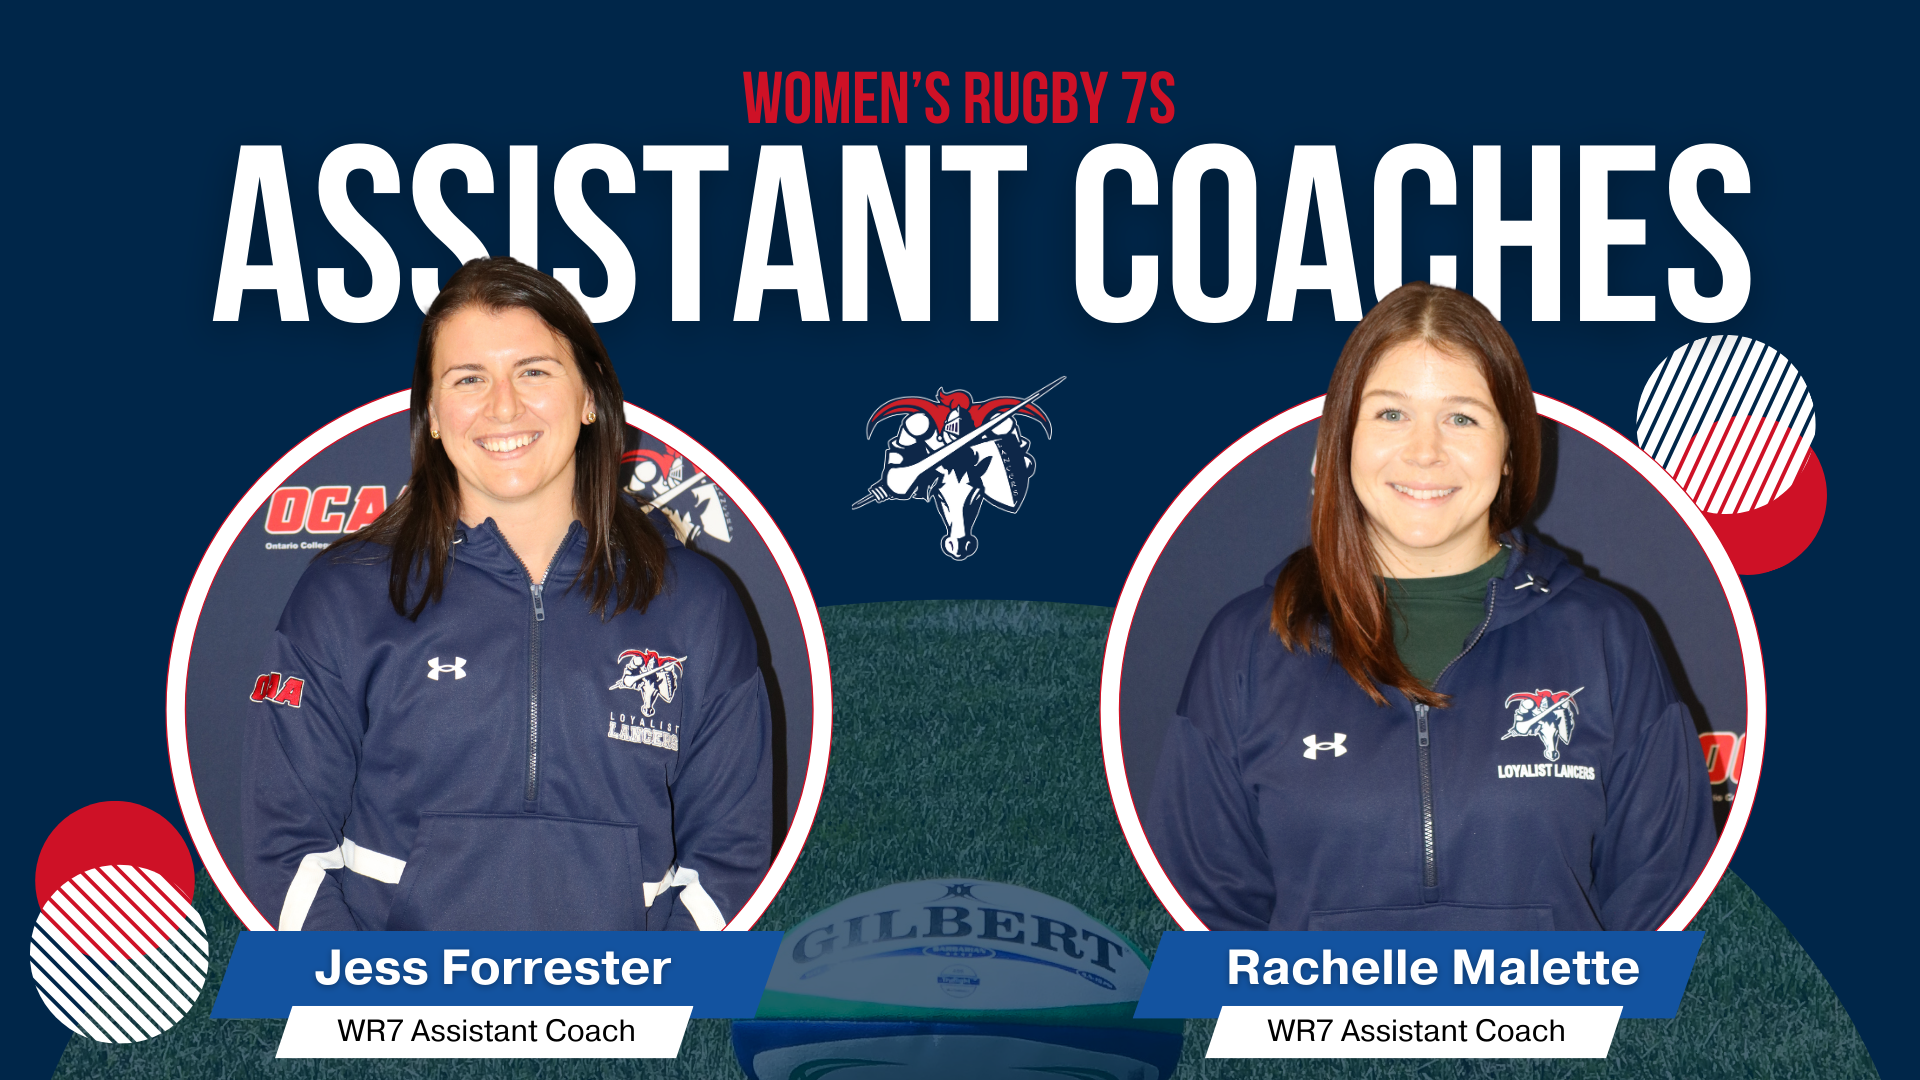 FORRESTER & MALETTE JOIN WOMEN'S RUGBY 7S COACHING STAFF